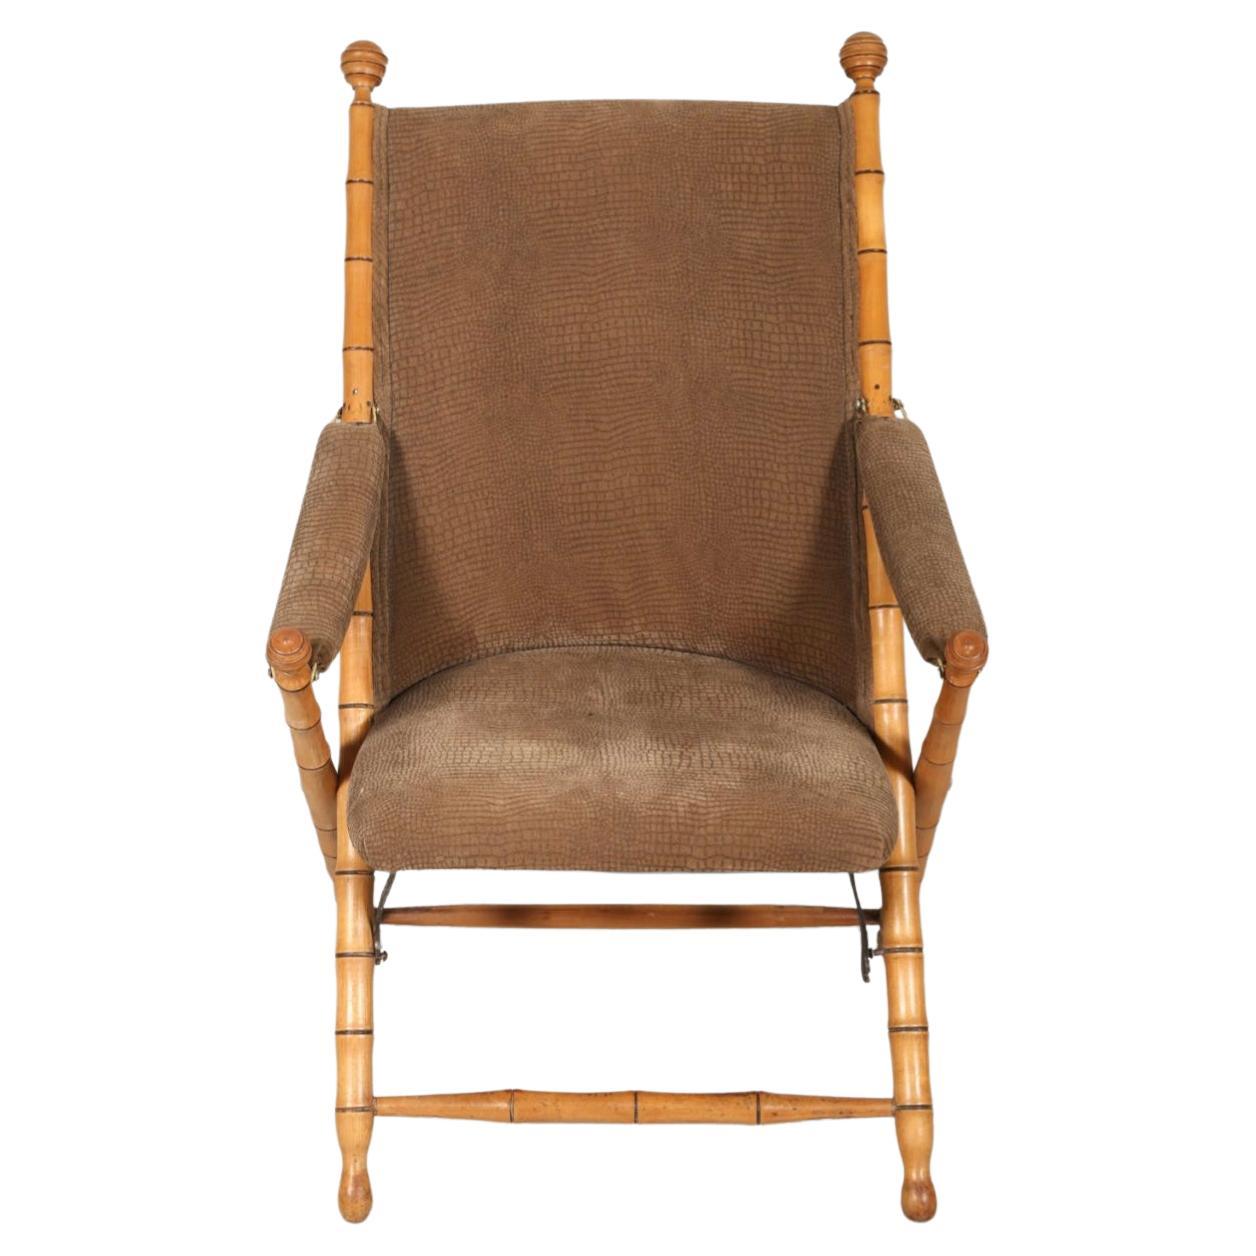 A magnificent pair of folding campaign chairs, made in France. The frames have been expertly carved to mimic bamboo, as chinoiserie was all the rage at the time. 
Late 19th or early 20th century lounge chairs with padded fabric back, seat and arm